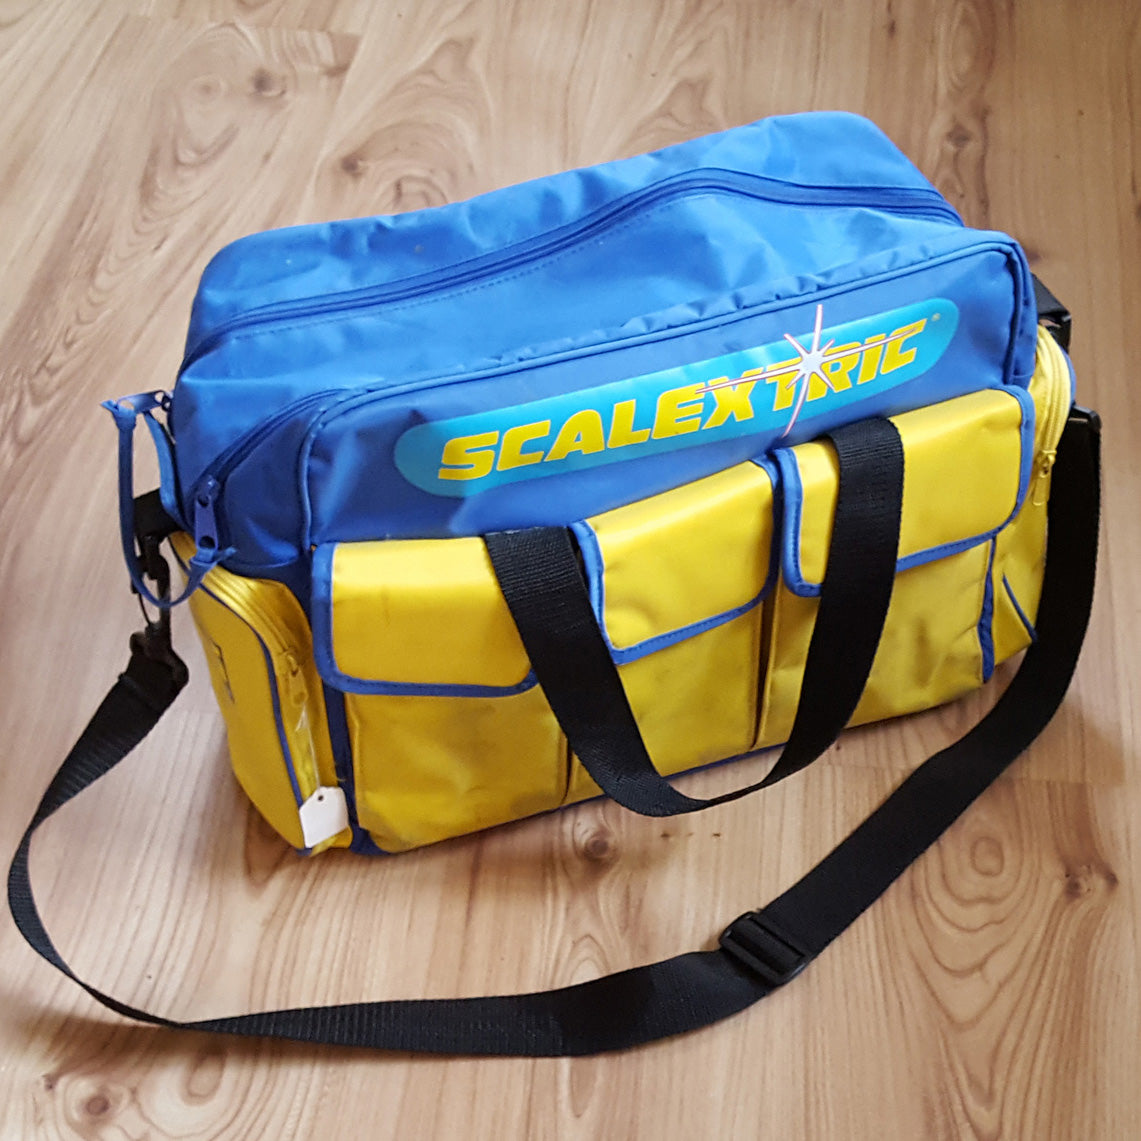 Scalextric Collectors Canvas Holdall Carrying Bag - Blue & Yellow